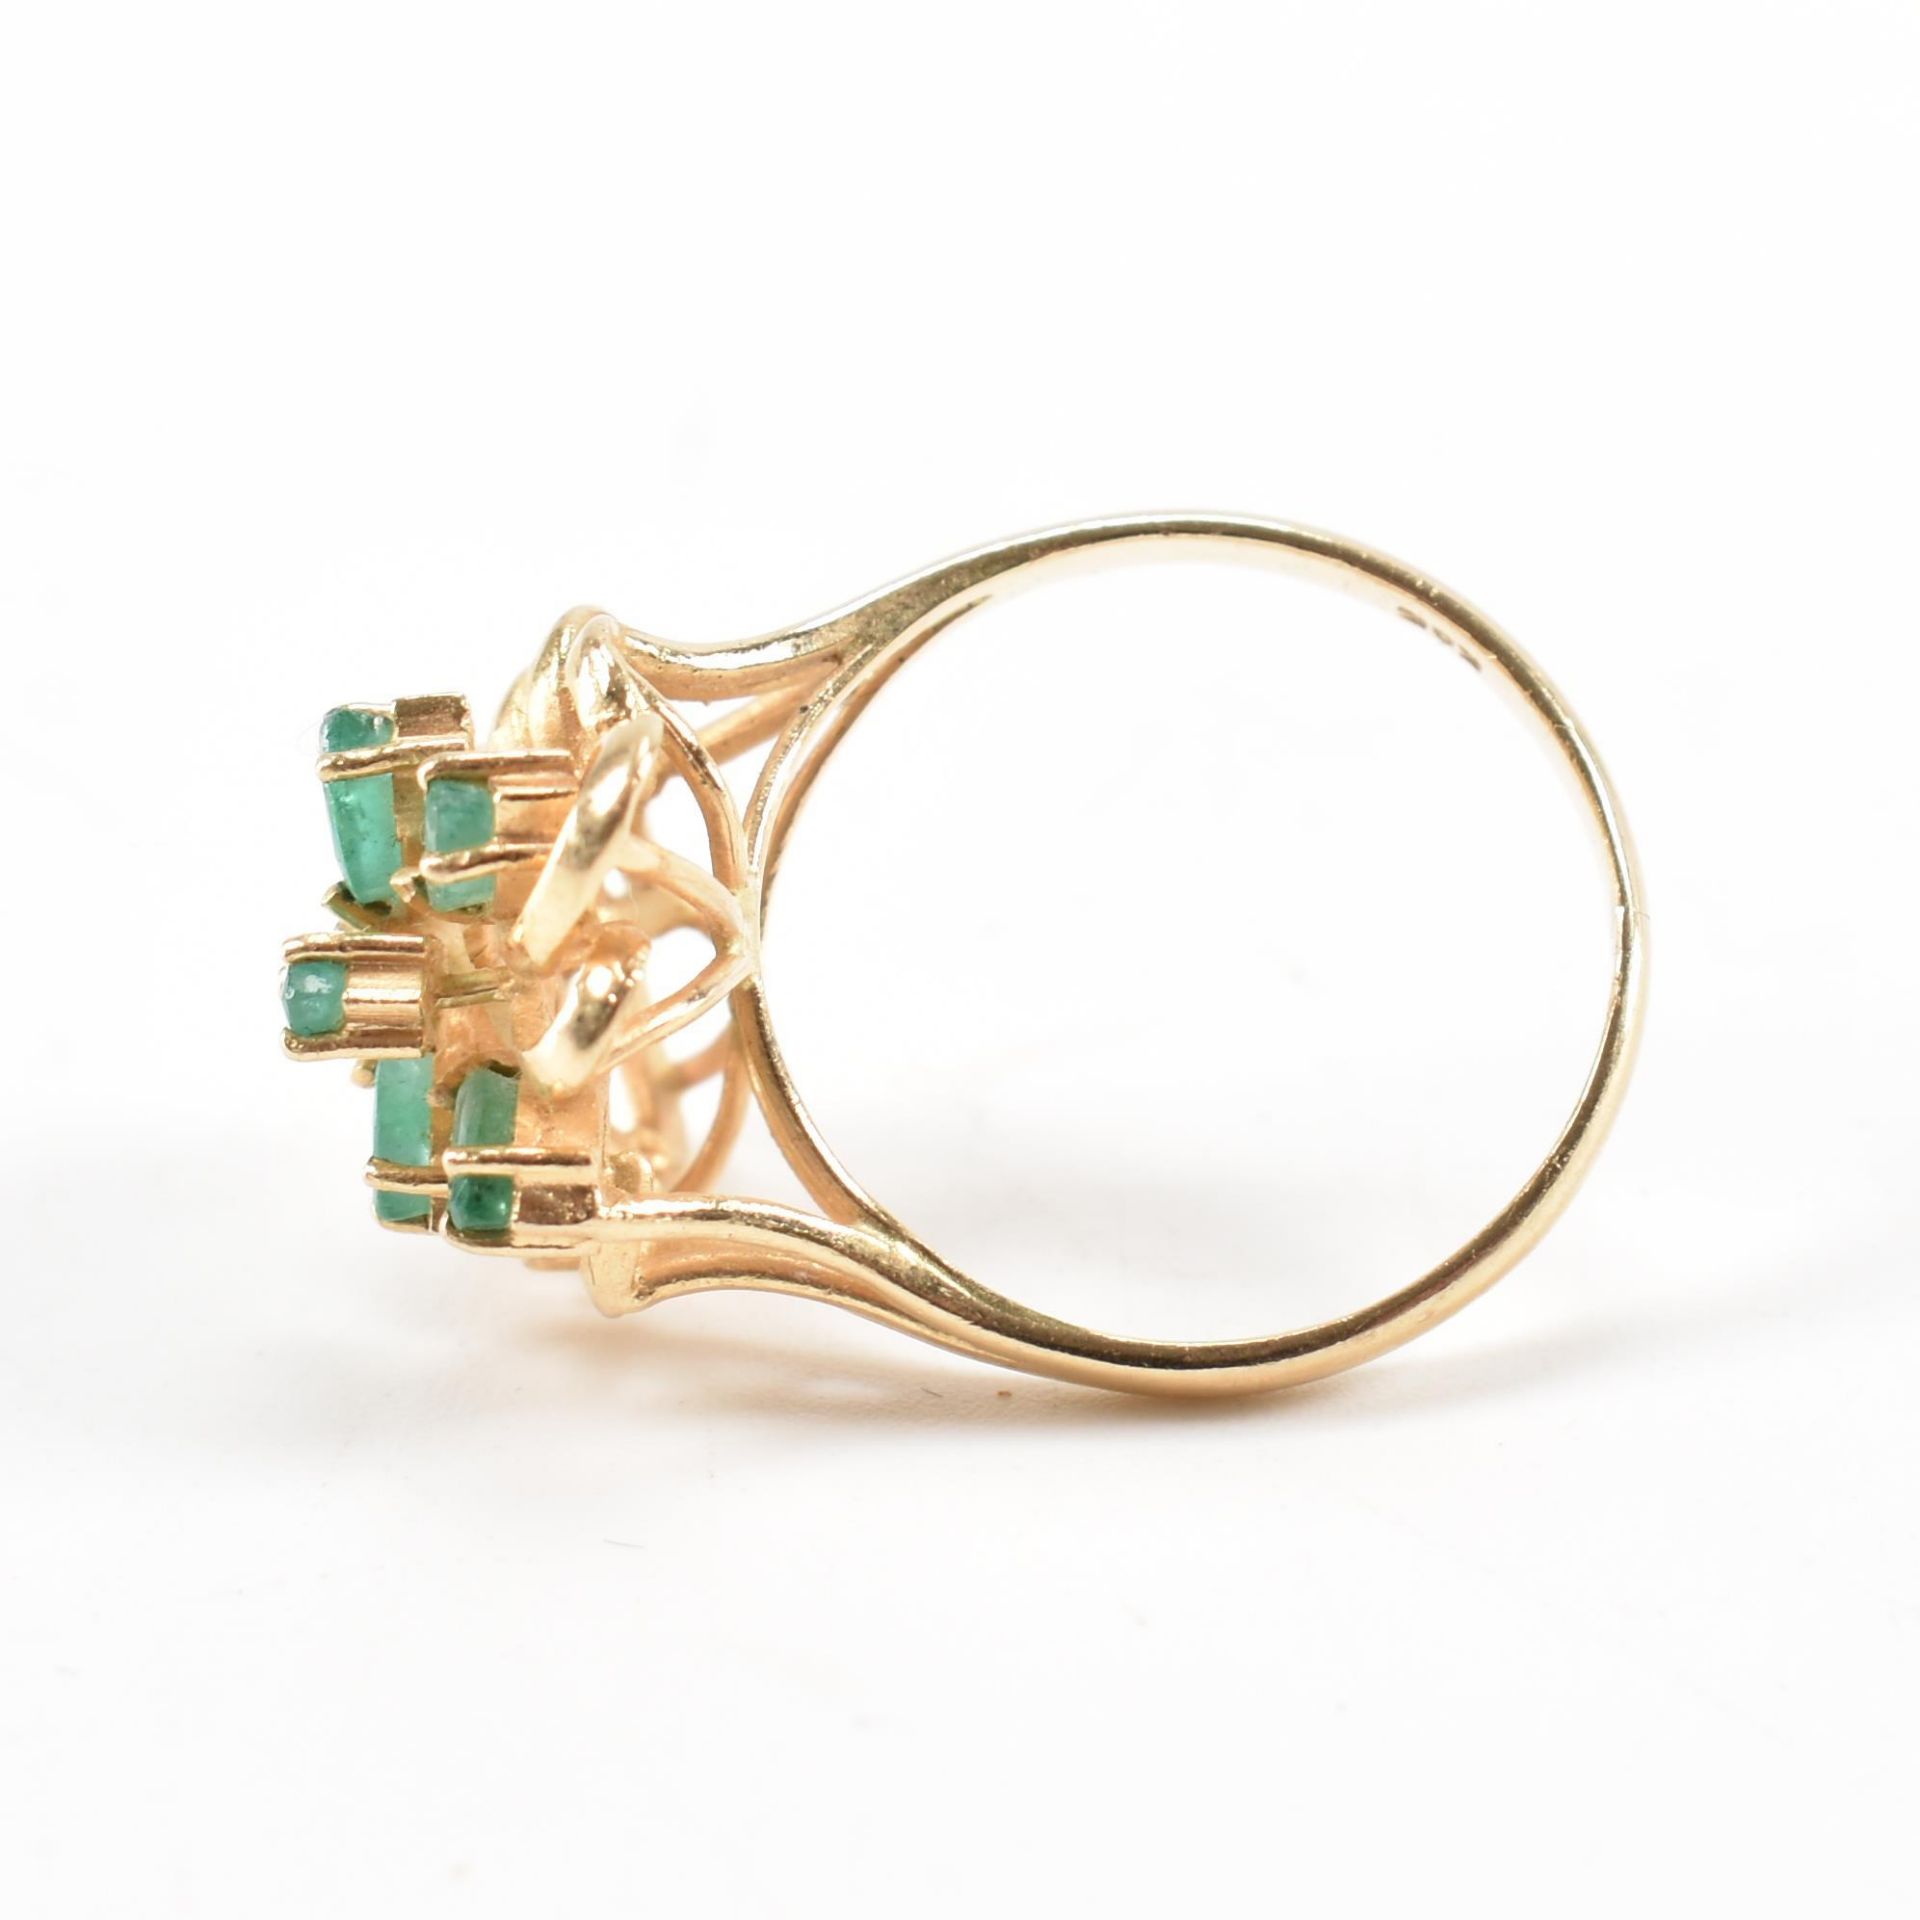 14CT GOLD EMERALD & DIAMOND CLUSTER RING - Image 2 of 5